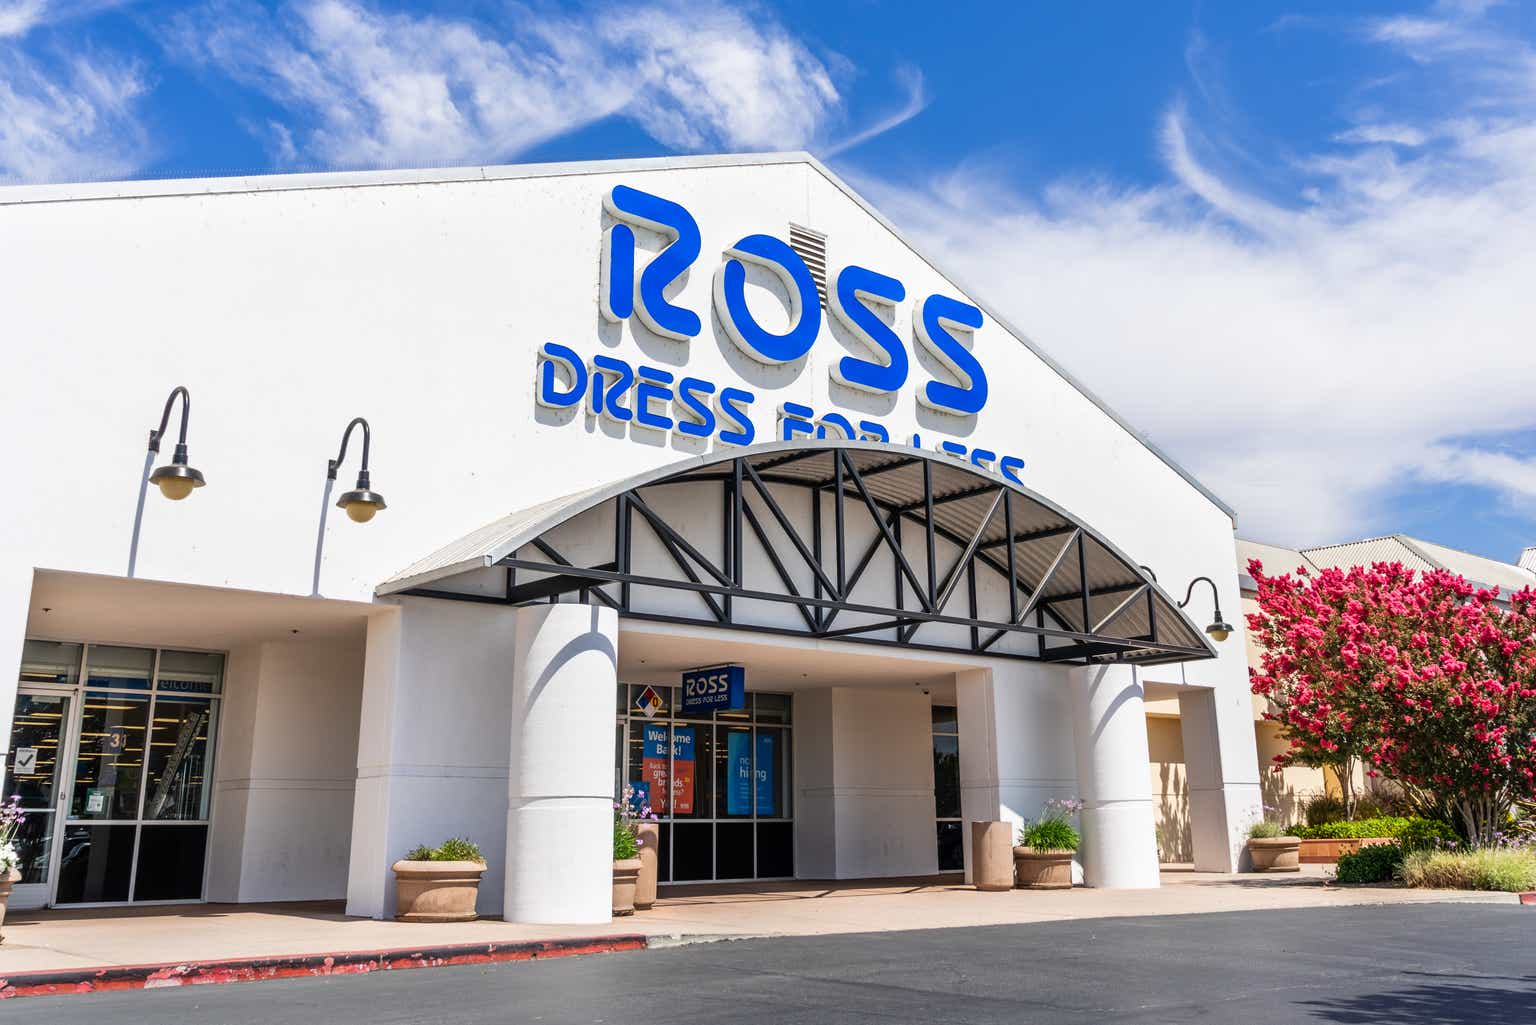 Best Ross Stores Near Me - December 2023: Find Nearby Ross Stores